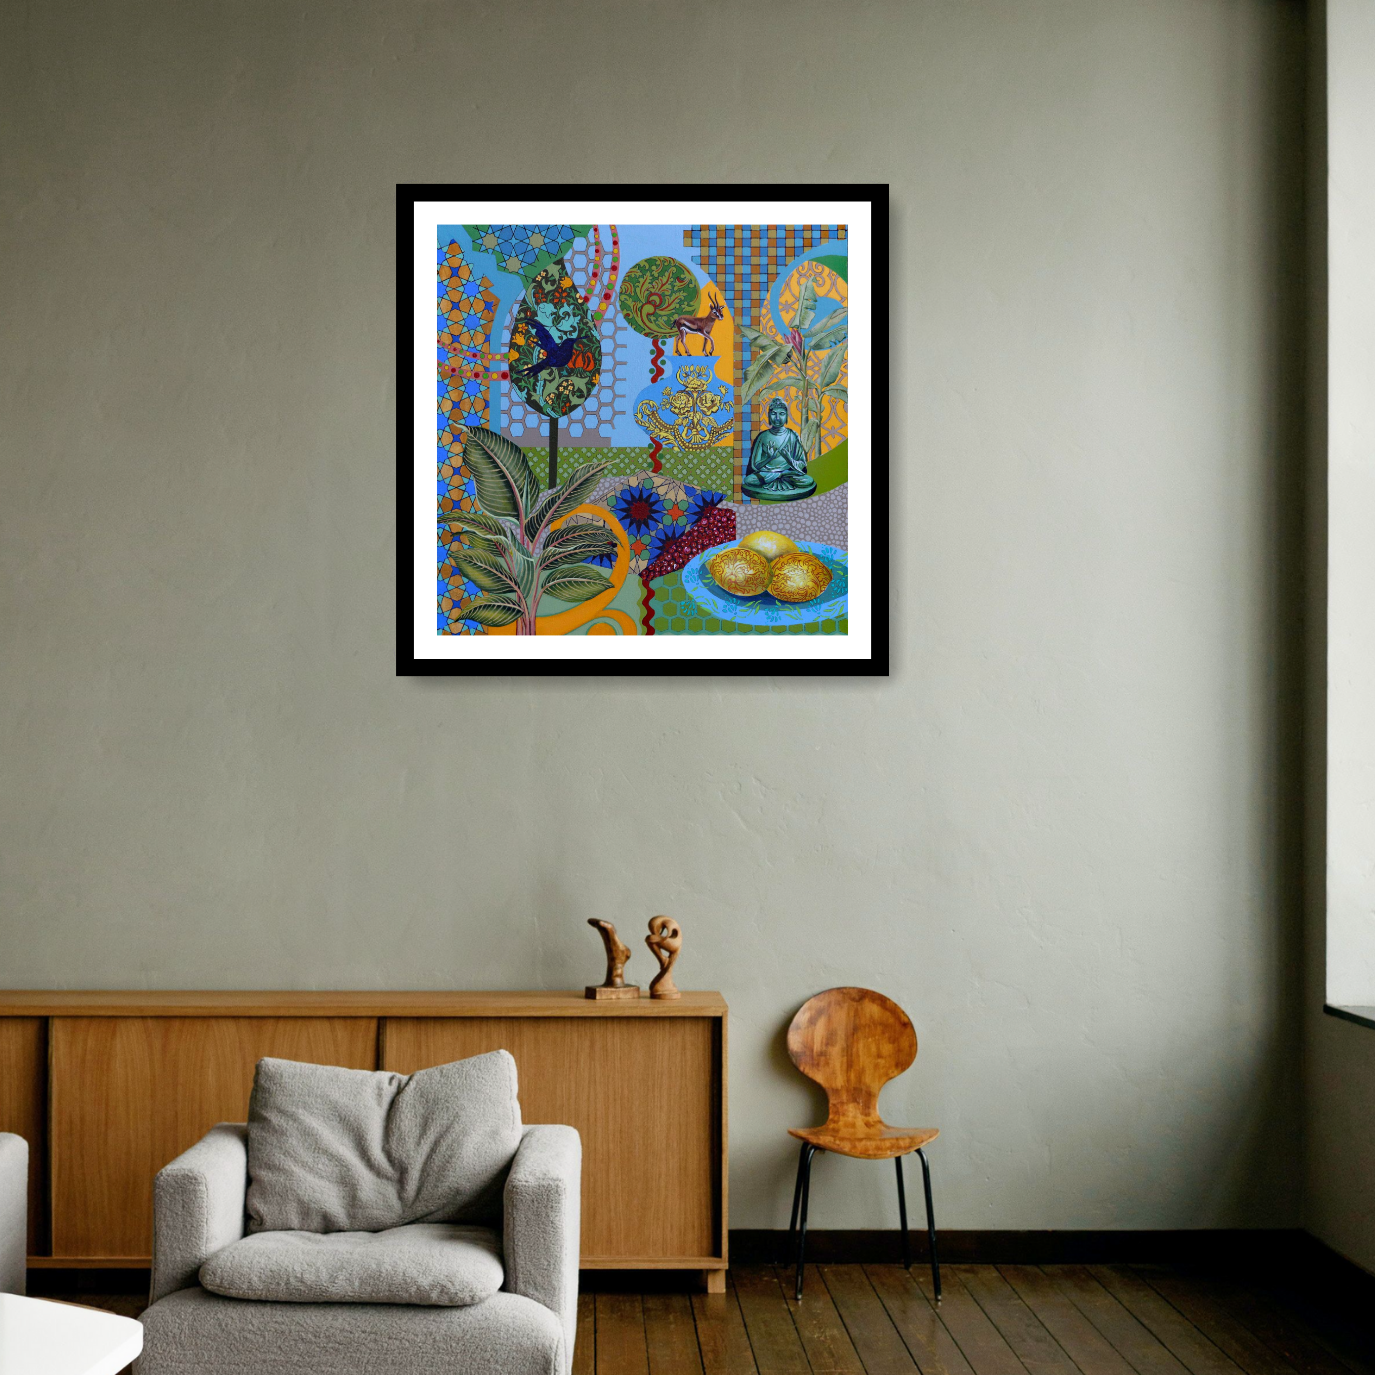 Black framed Fine Art Print: 'Love of 3 Lemons, 2020' by Frances Ferdinands is a contemporary masterpiece featuring vibrant colours and whimsical imagery of lemons, antelopes, and trees. This captivating artwork blends elements of Buddhism with modern symbolism, adding a unique touch to any space.